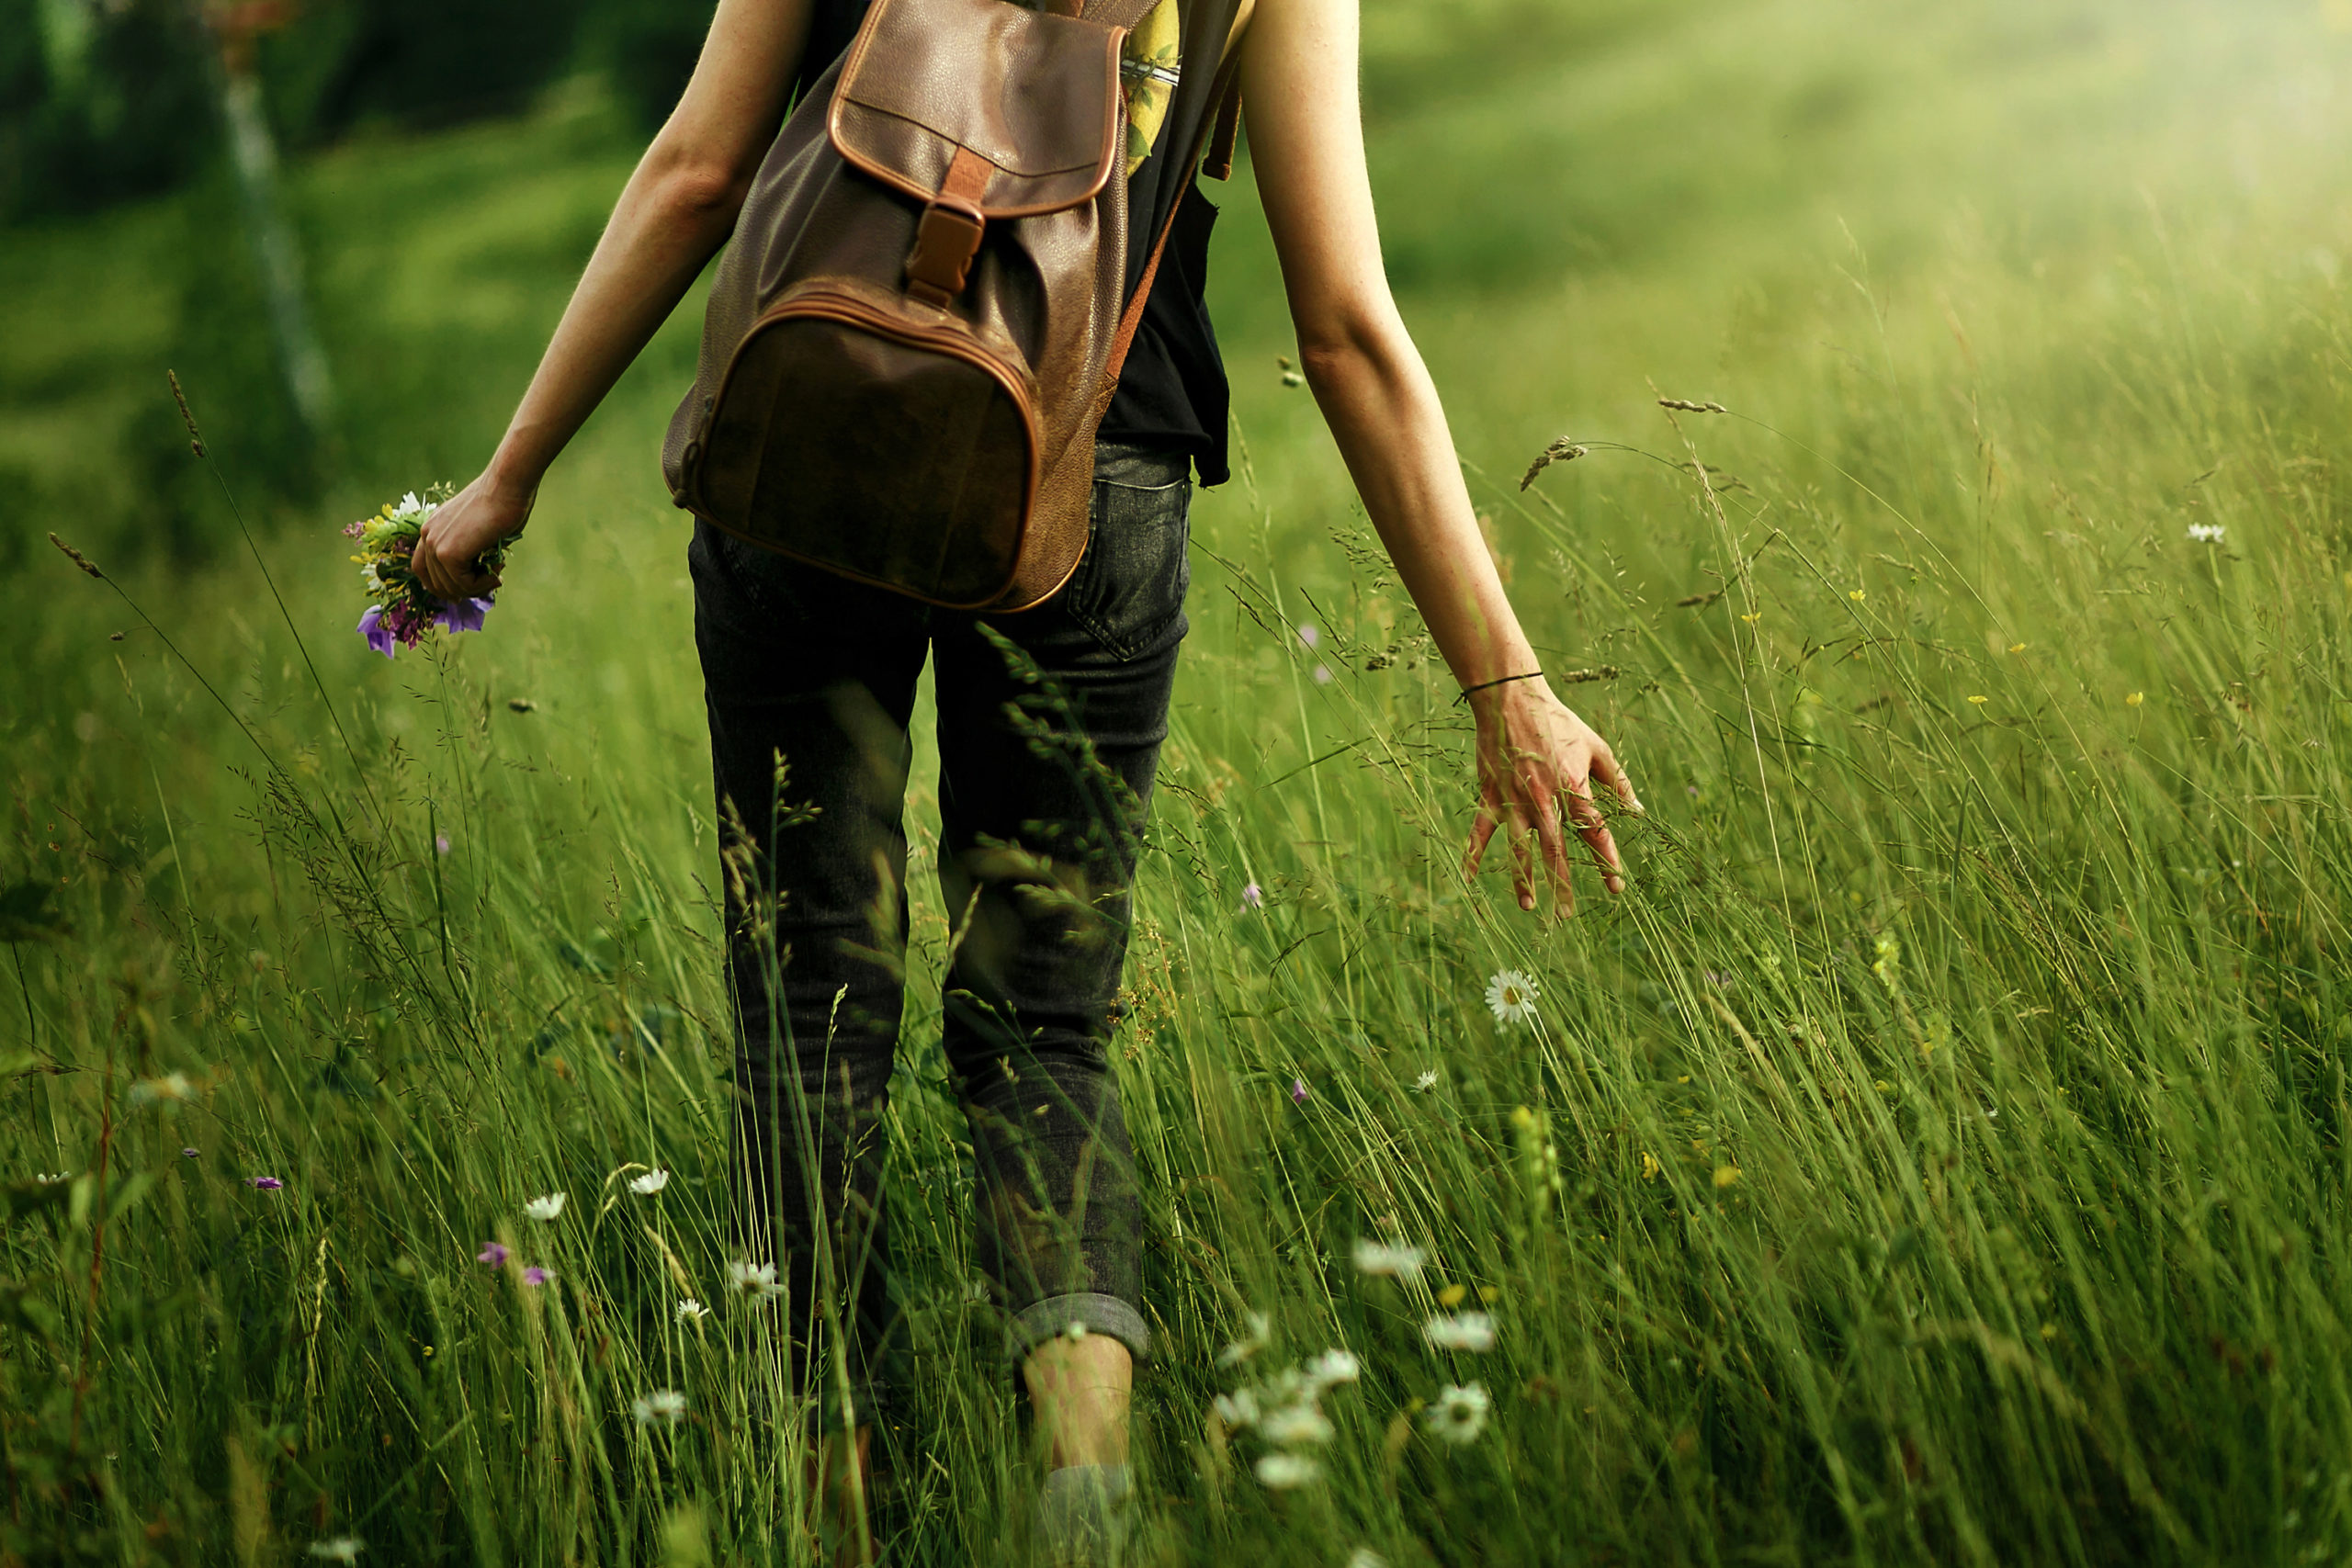 RxLeaf Naturals category represented by woman walking in field of grass